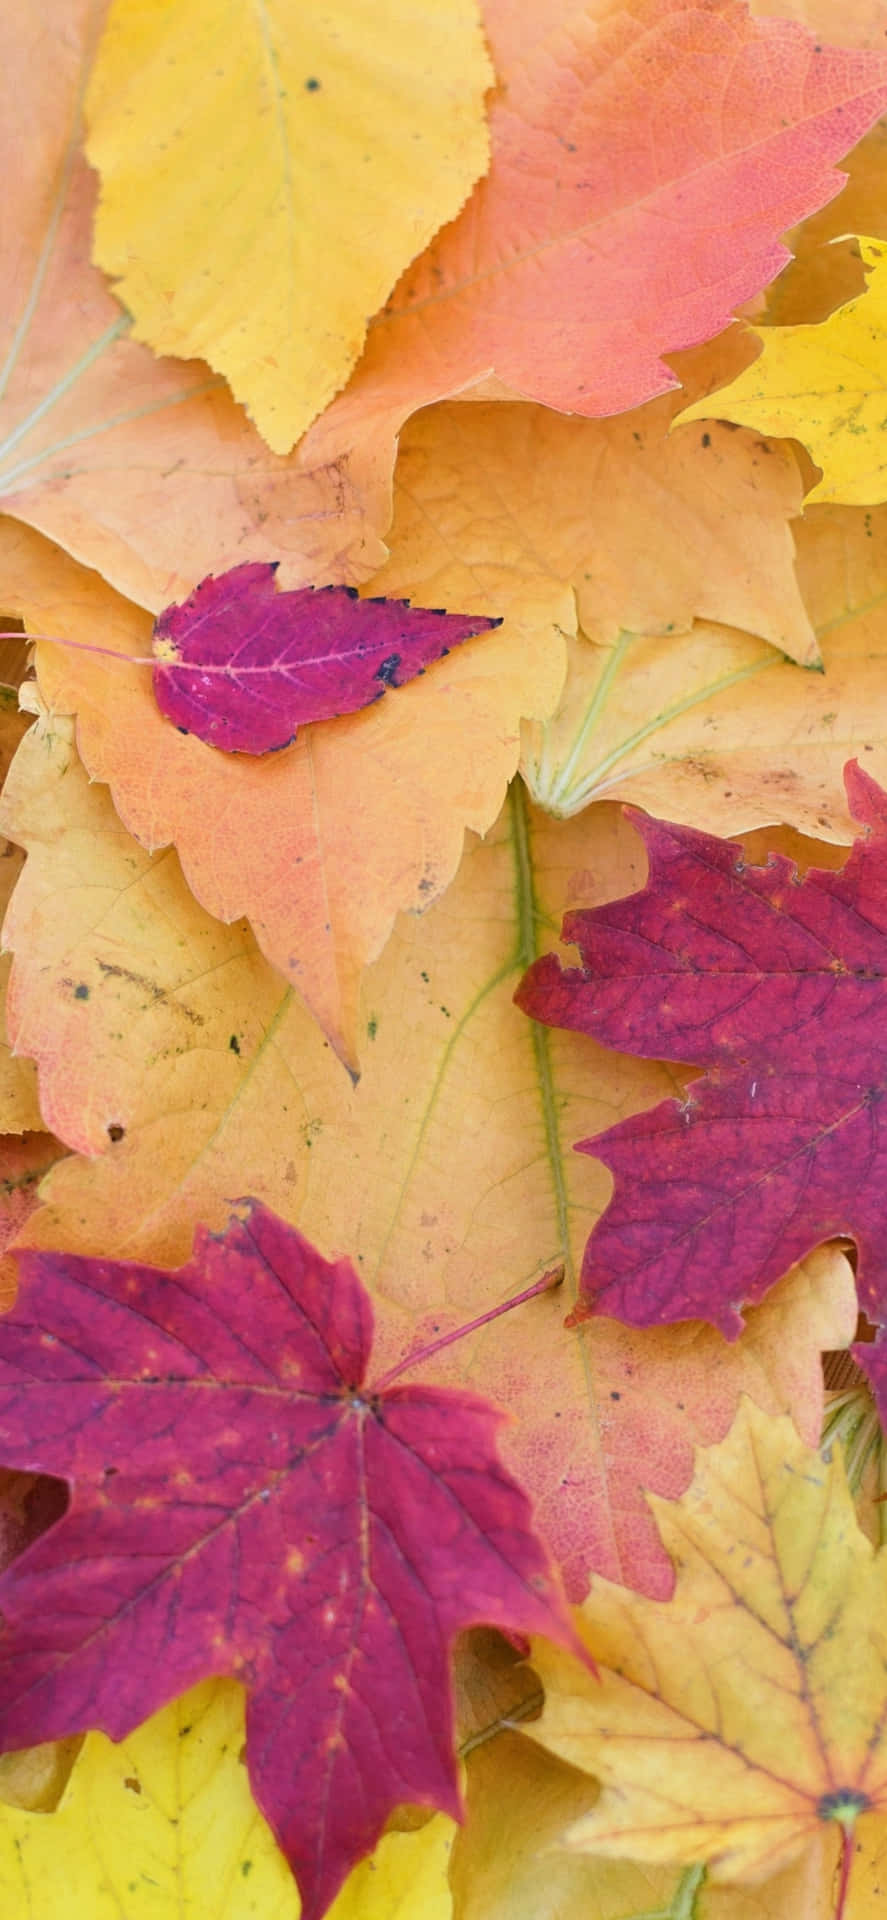 Pastel-colored Fall Leaves Iphone Wallpaper